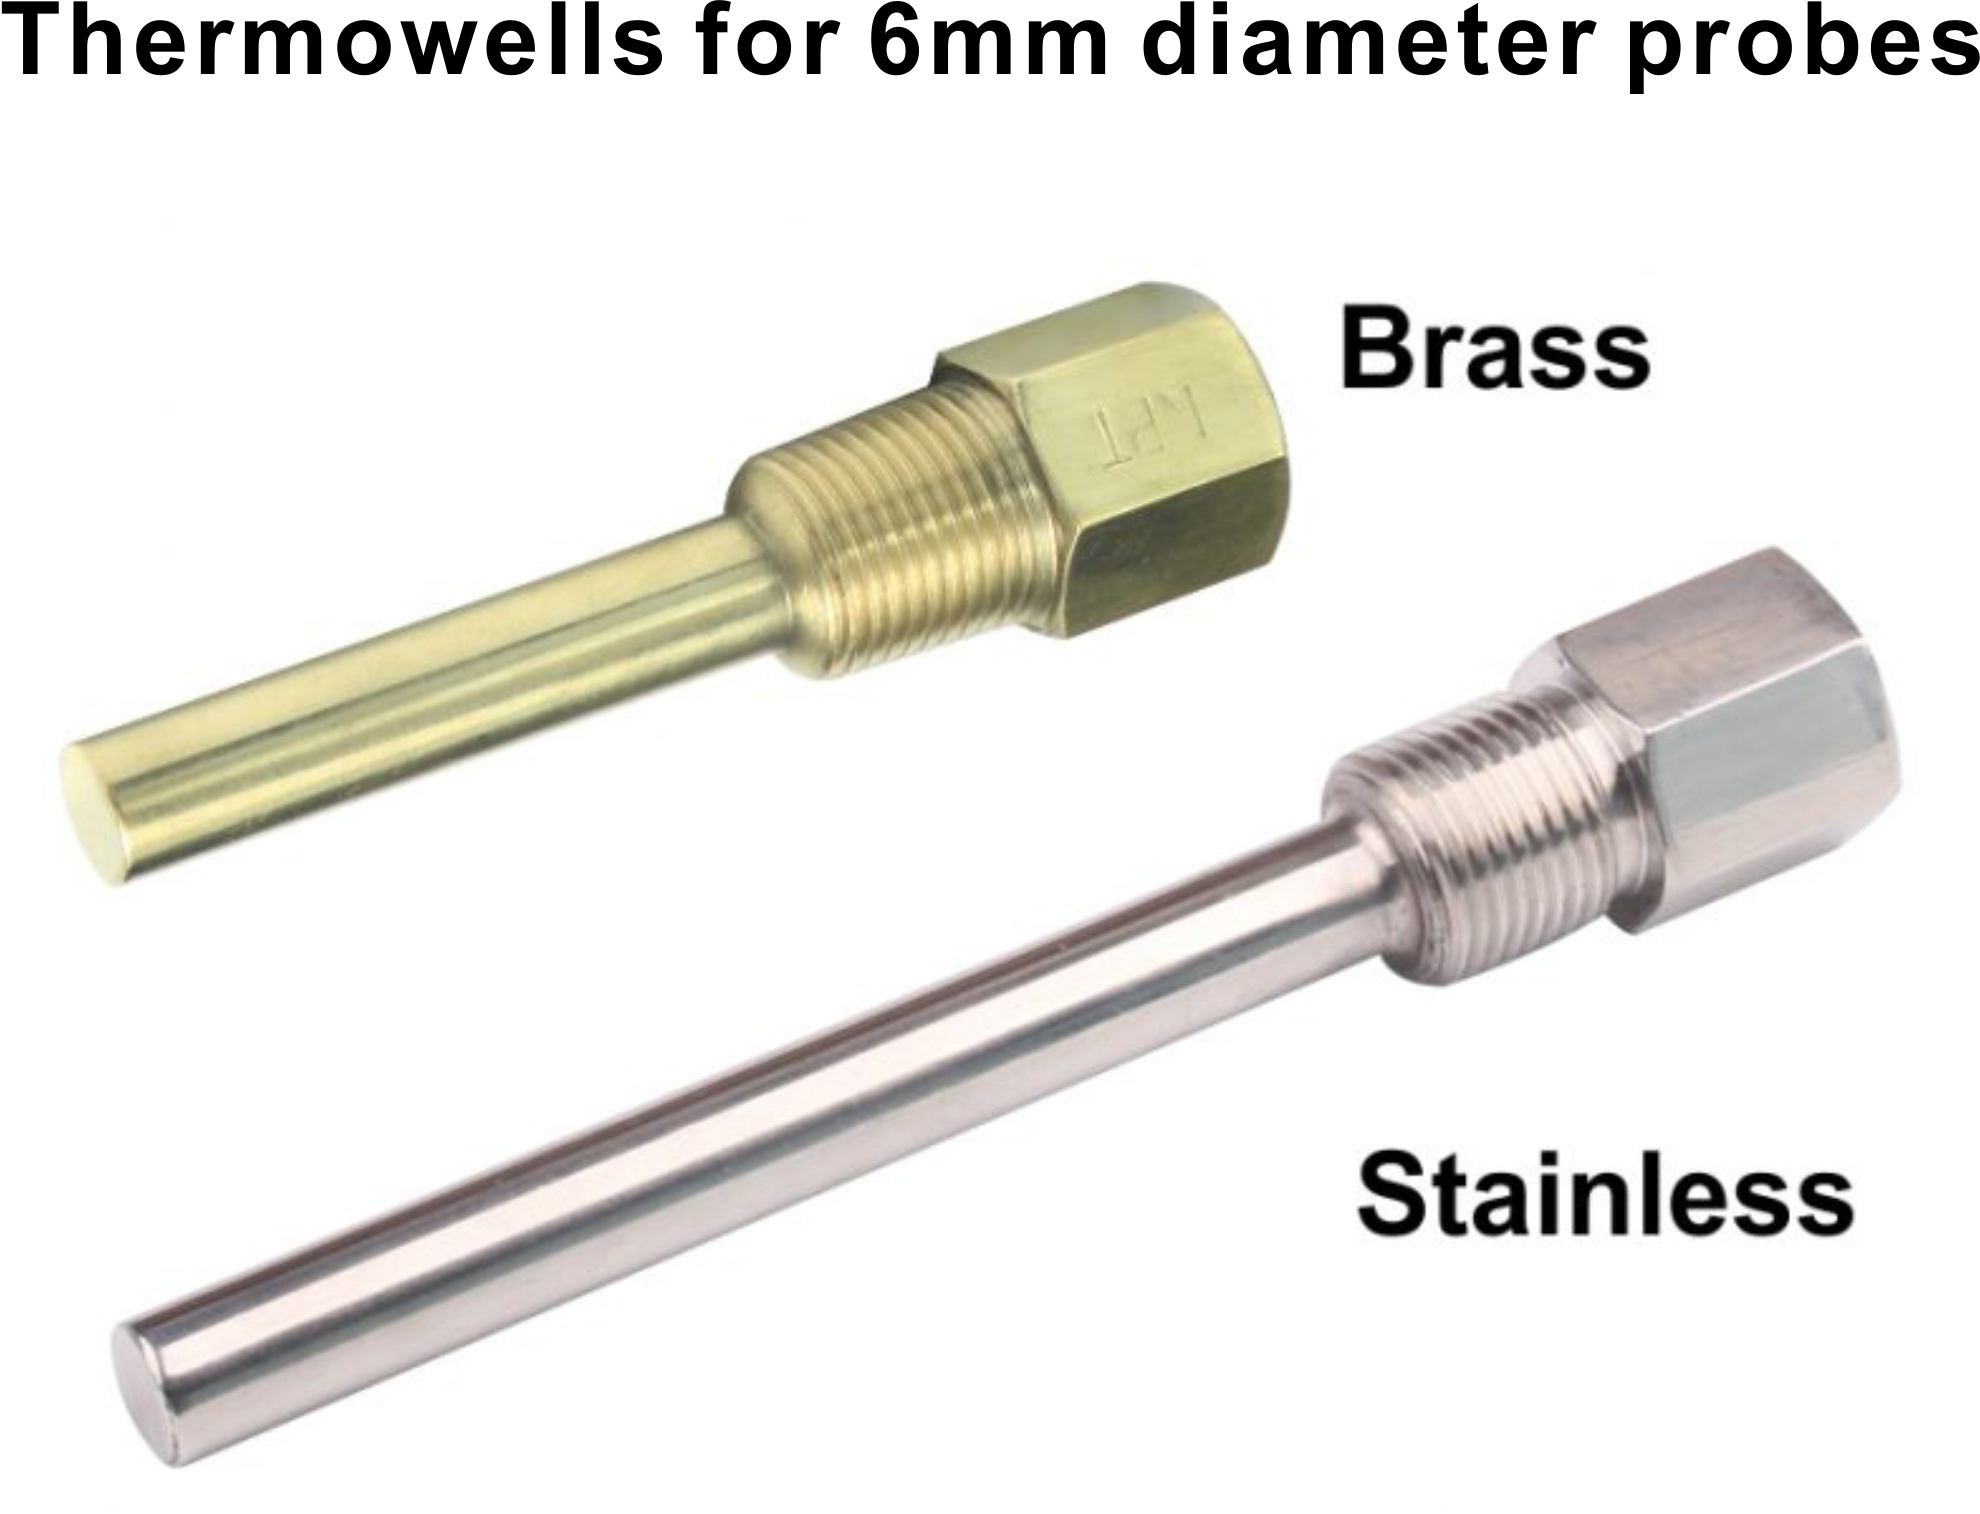 Stainless Steel Thermowell 1/2"NPT Threads for Temperature Sensors ThermowelYRDE 